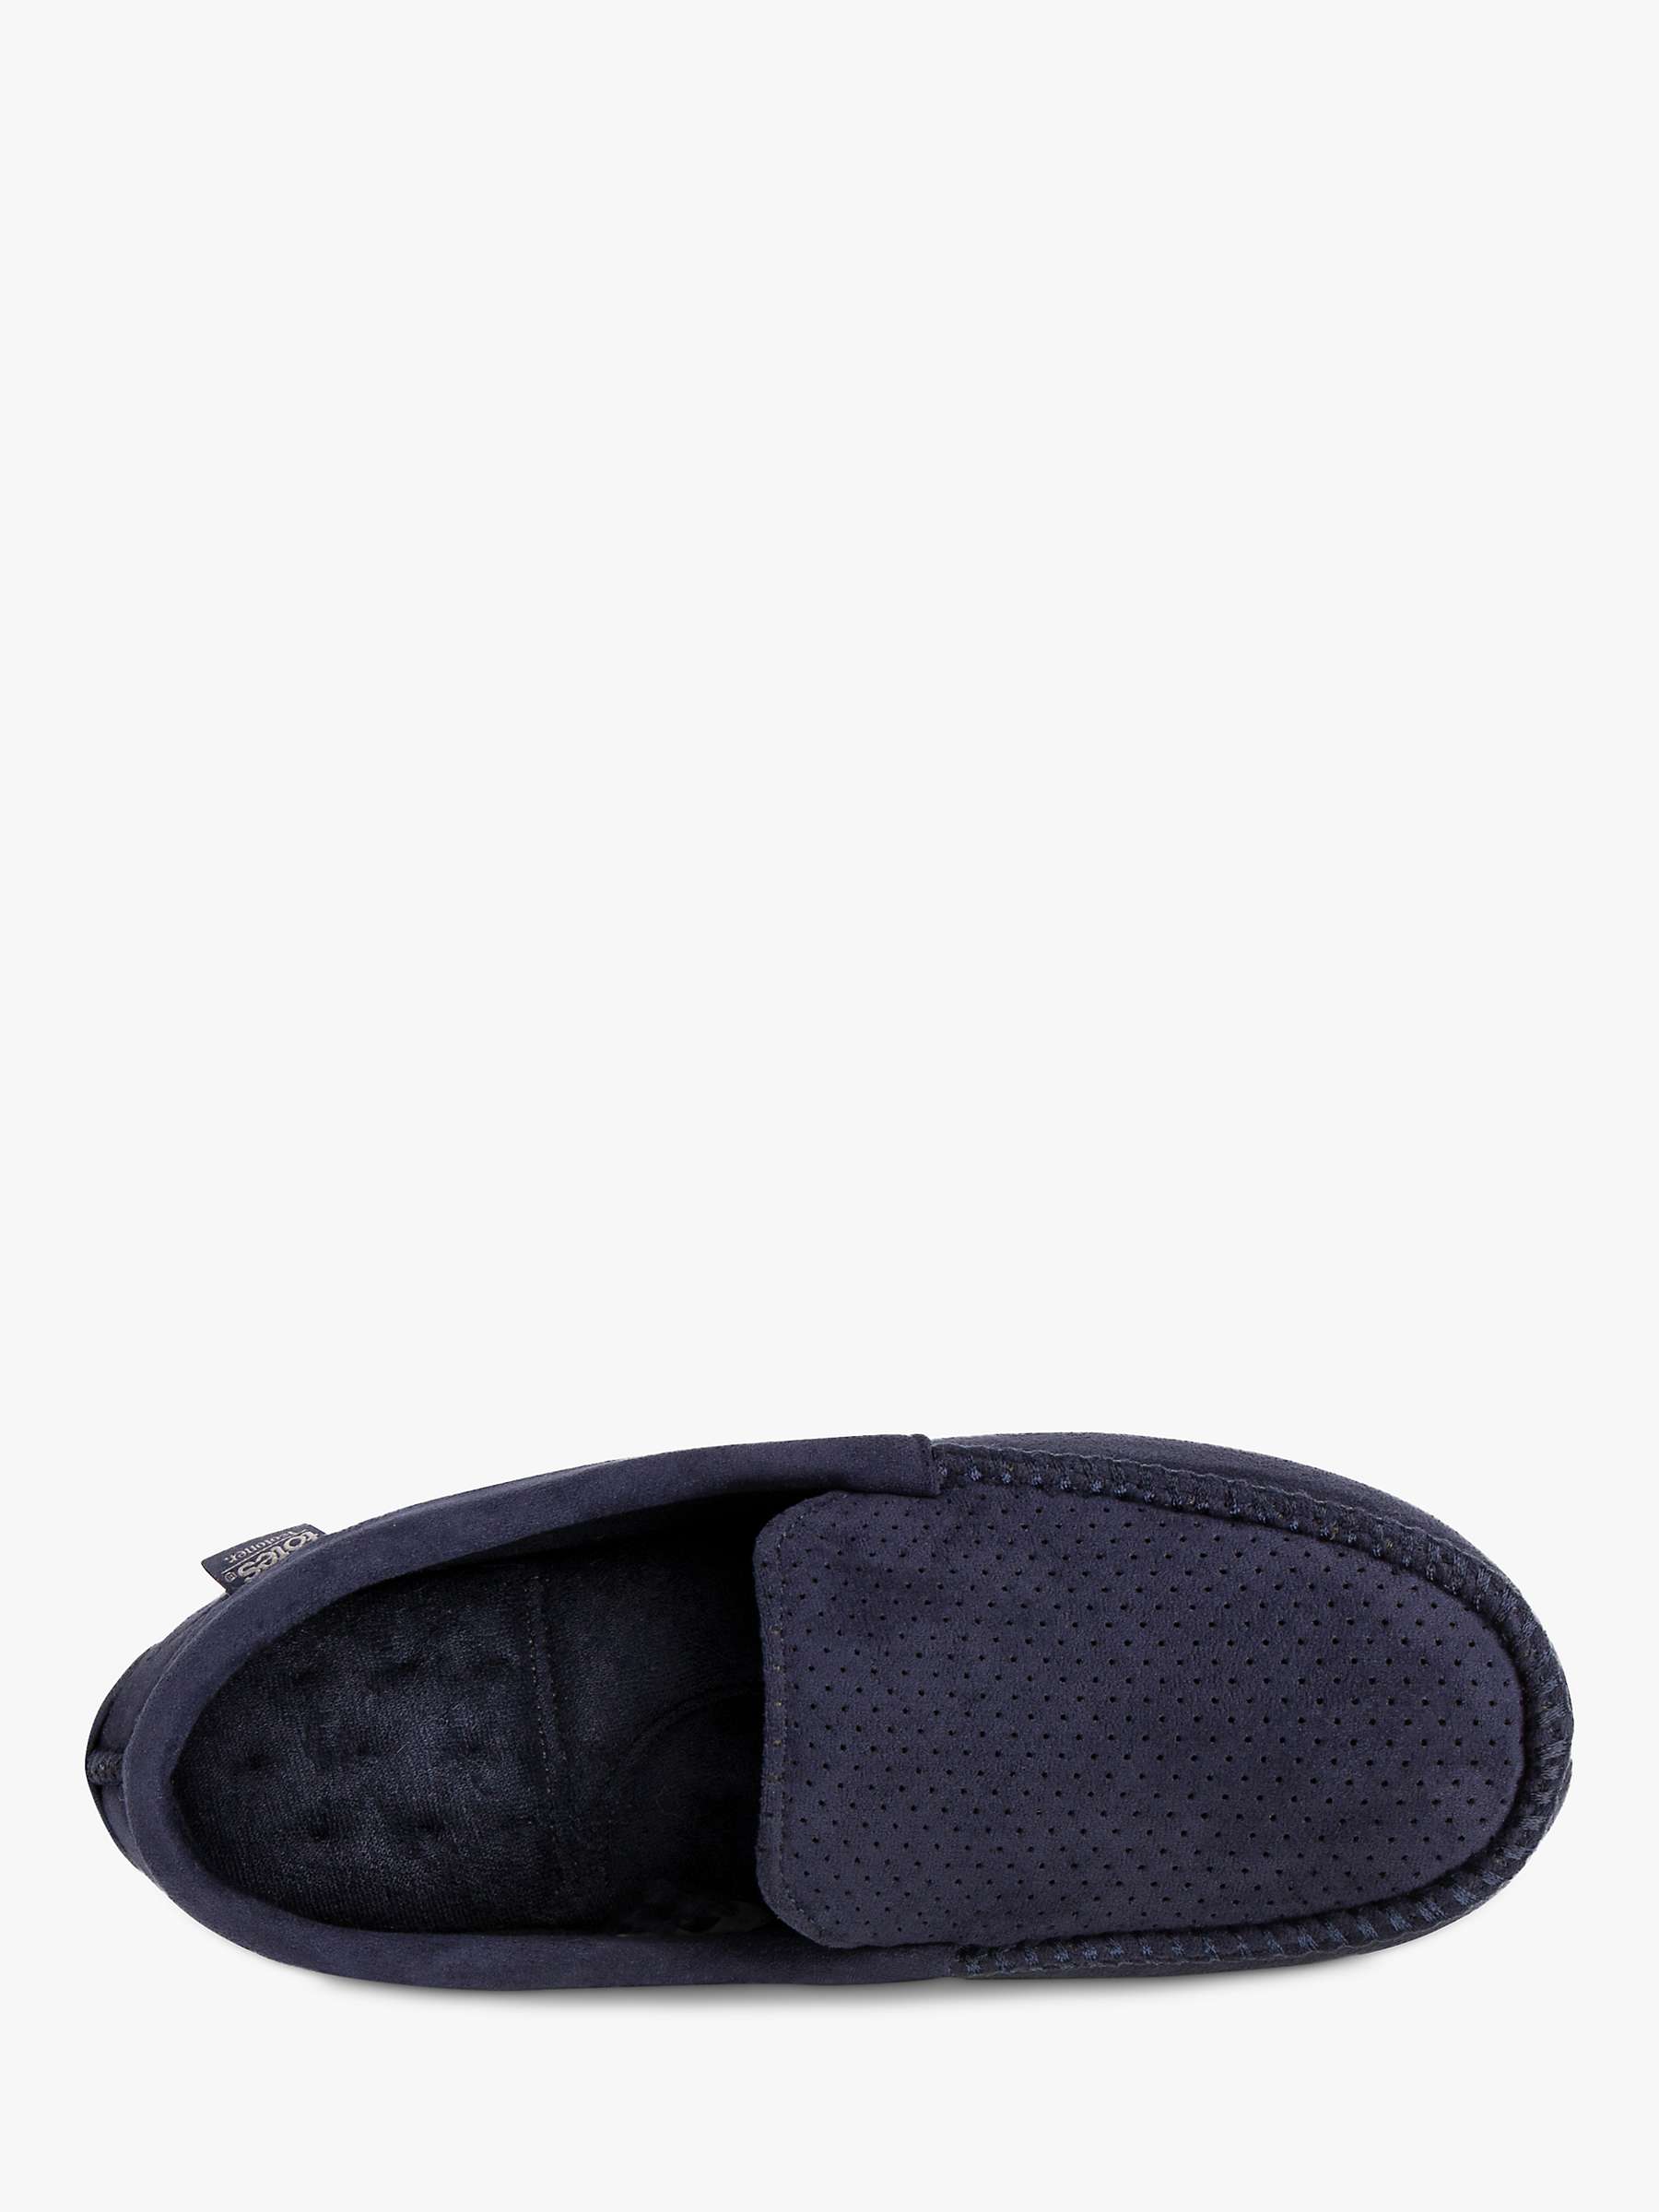 Buy totes Airtex Suedette Moccasin Slippers Online at johnlewis.com